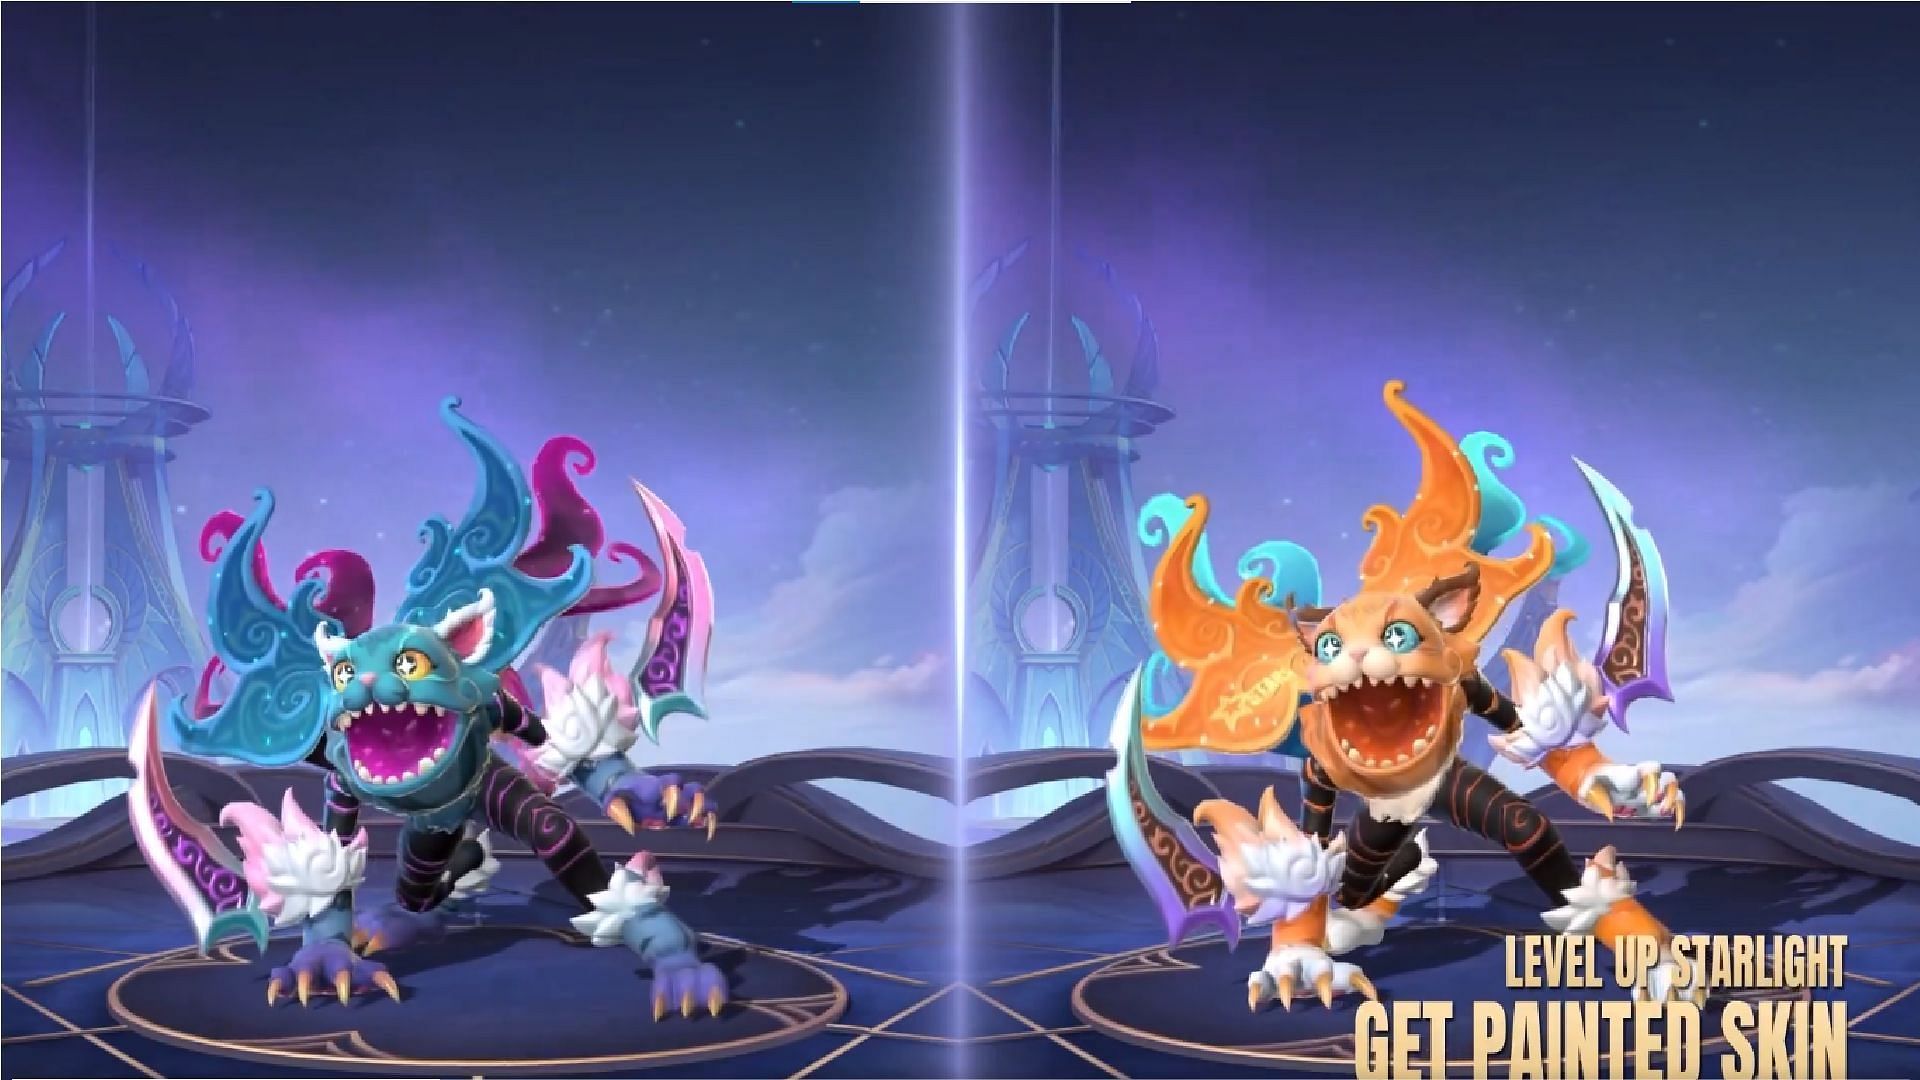 Helcurt is getting new Starlight Skins after revamp (Image via Moonton Games)